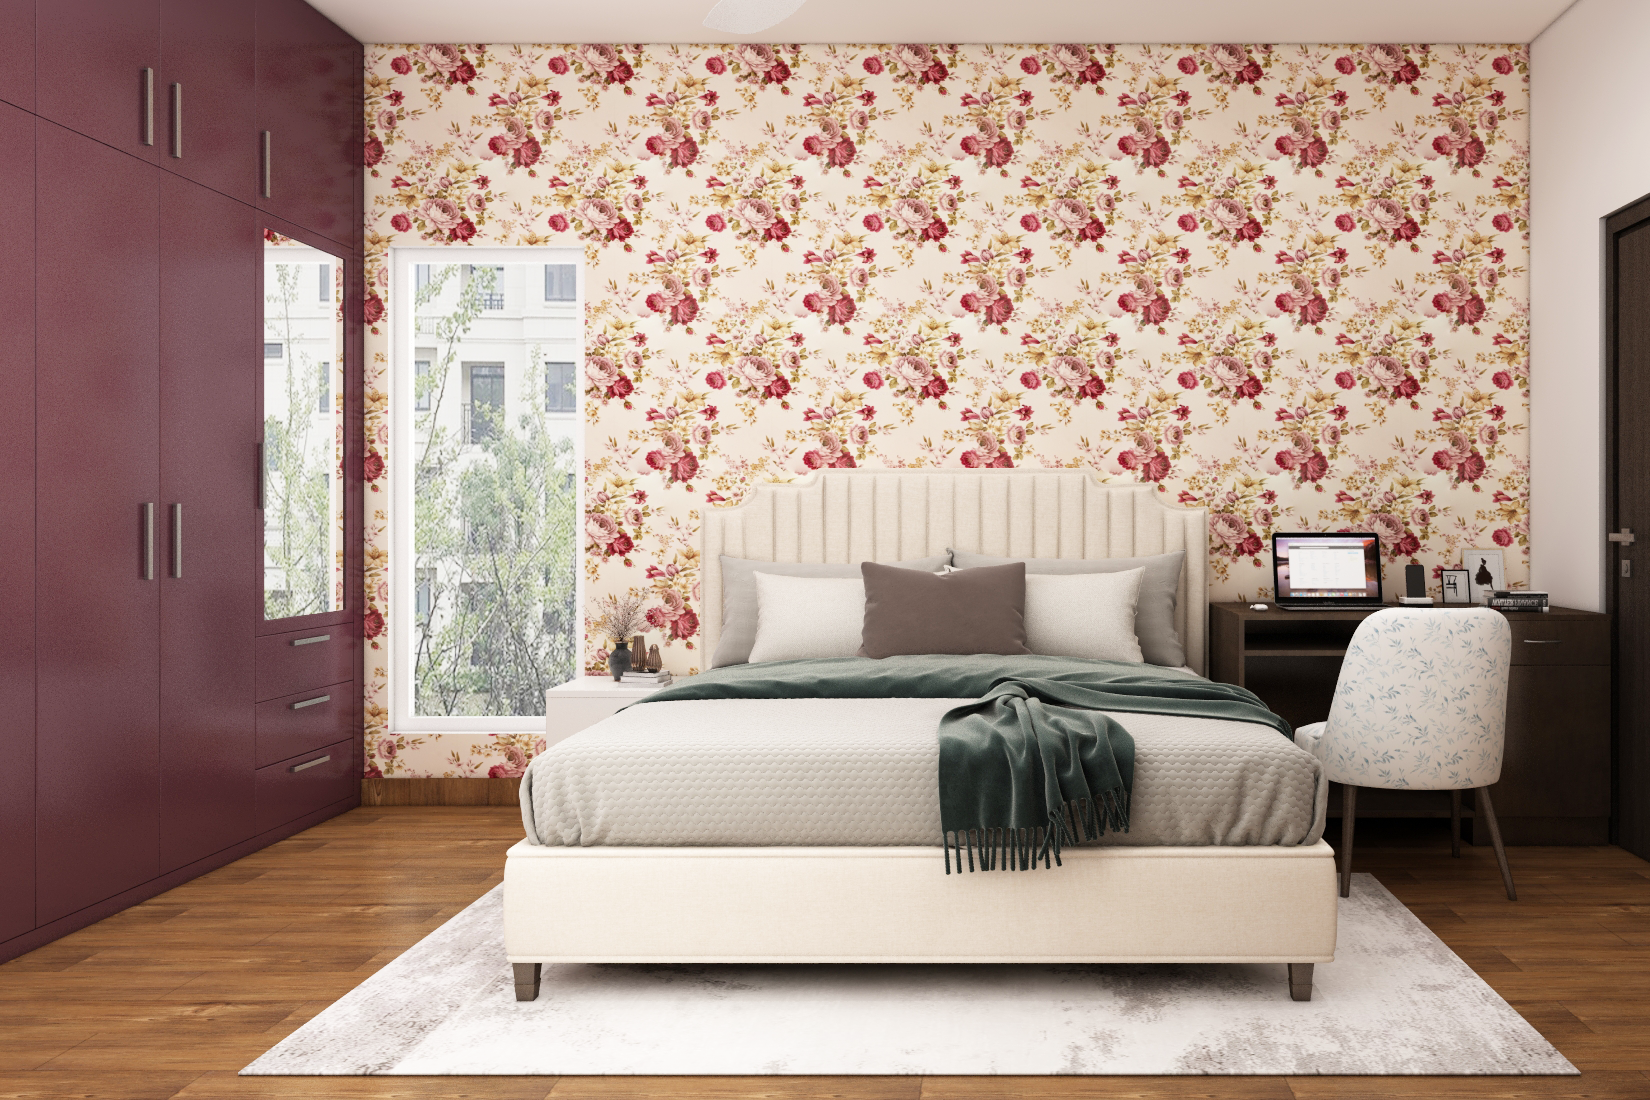 Art Deco Bedroom Wallpaper With A Floral Pattern